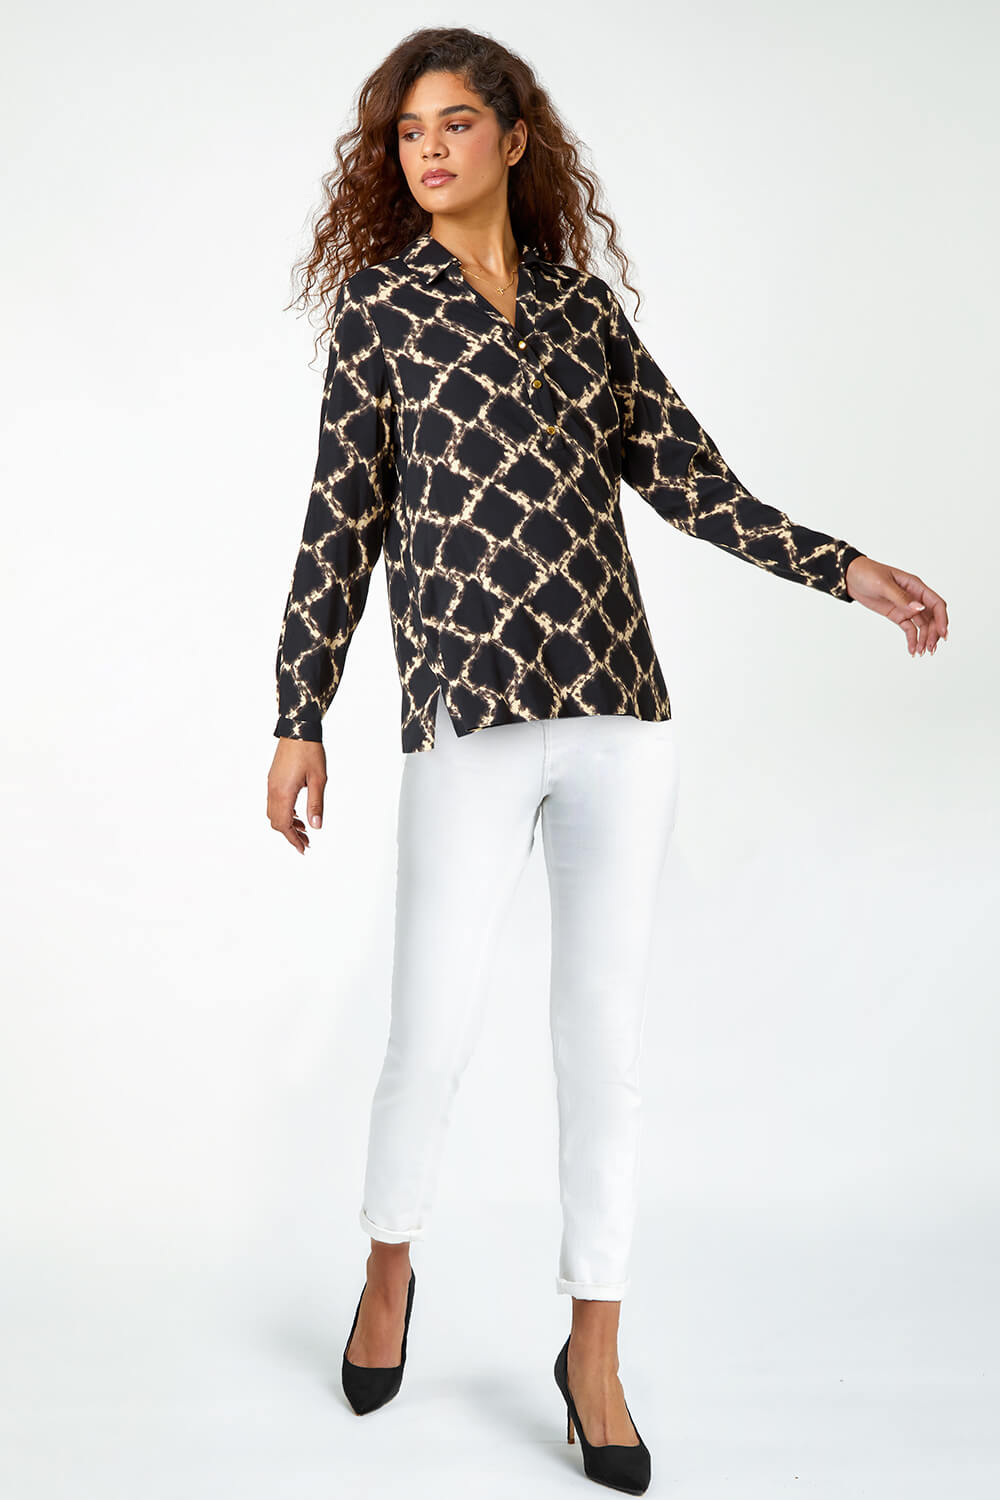 Black Chain Print Collared Top, Image 2 of 5